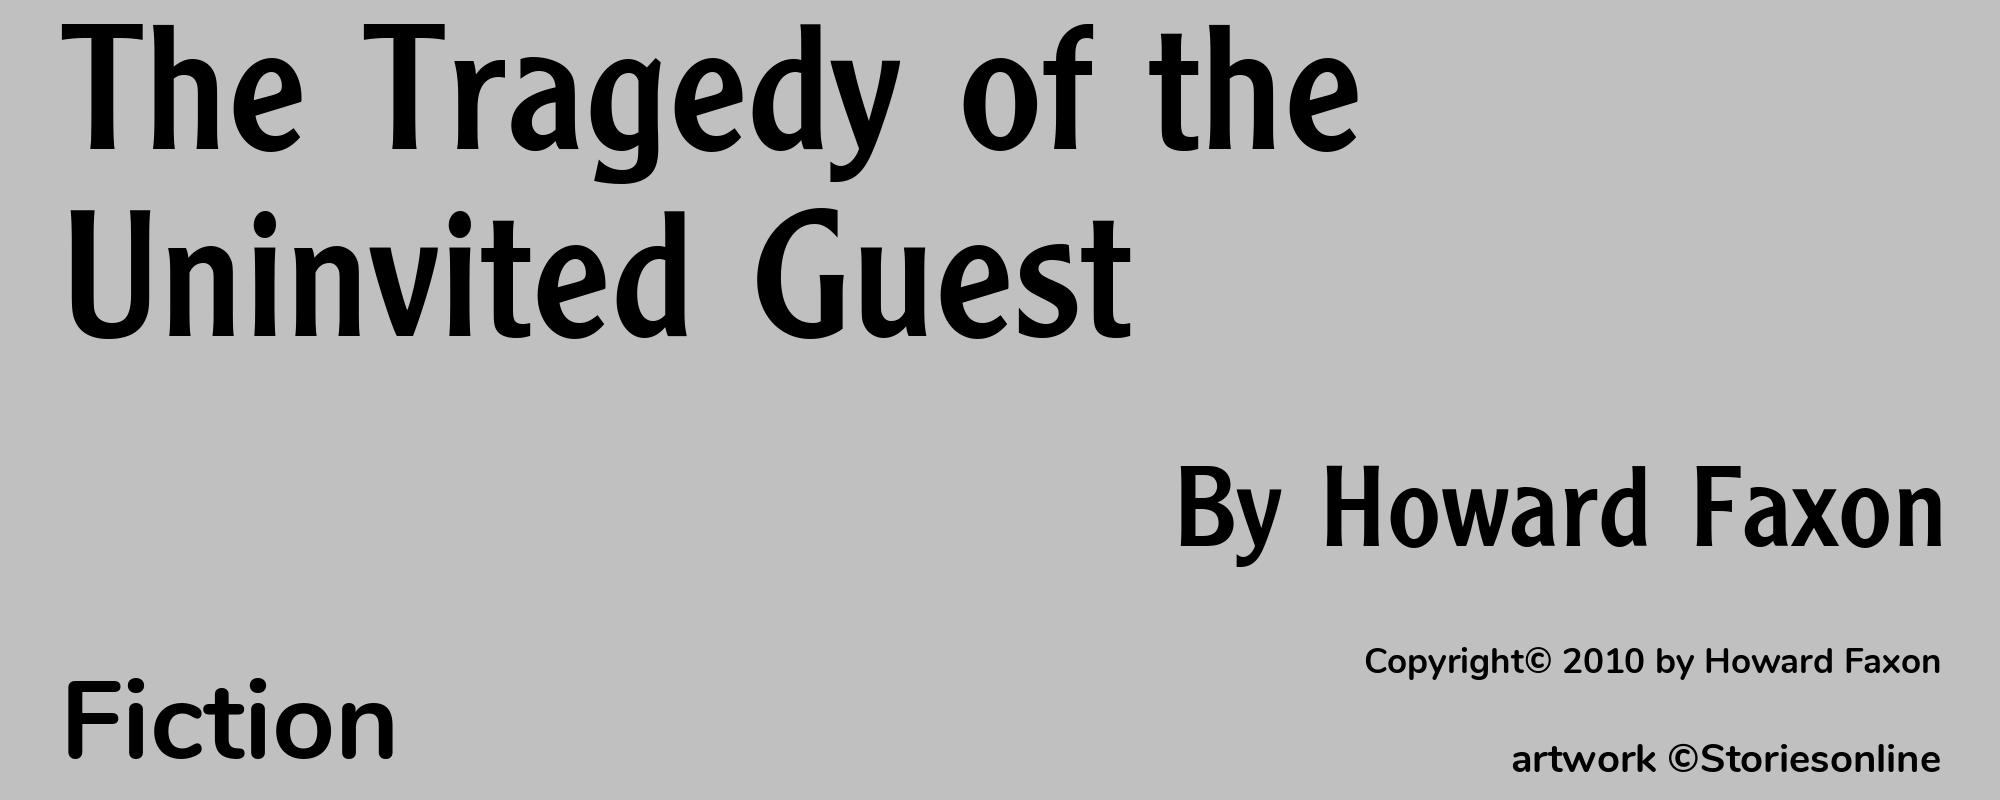 The Tragedy of the Uninvited Guest - Cover